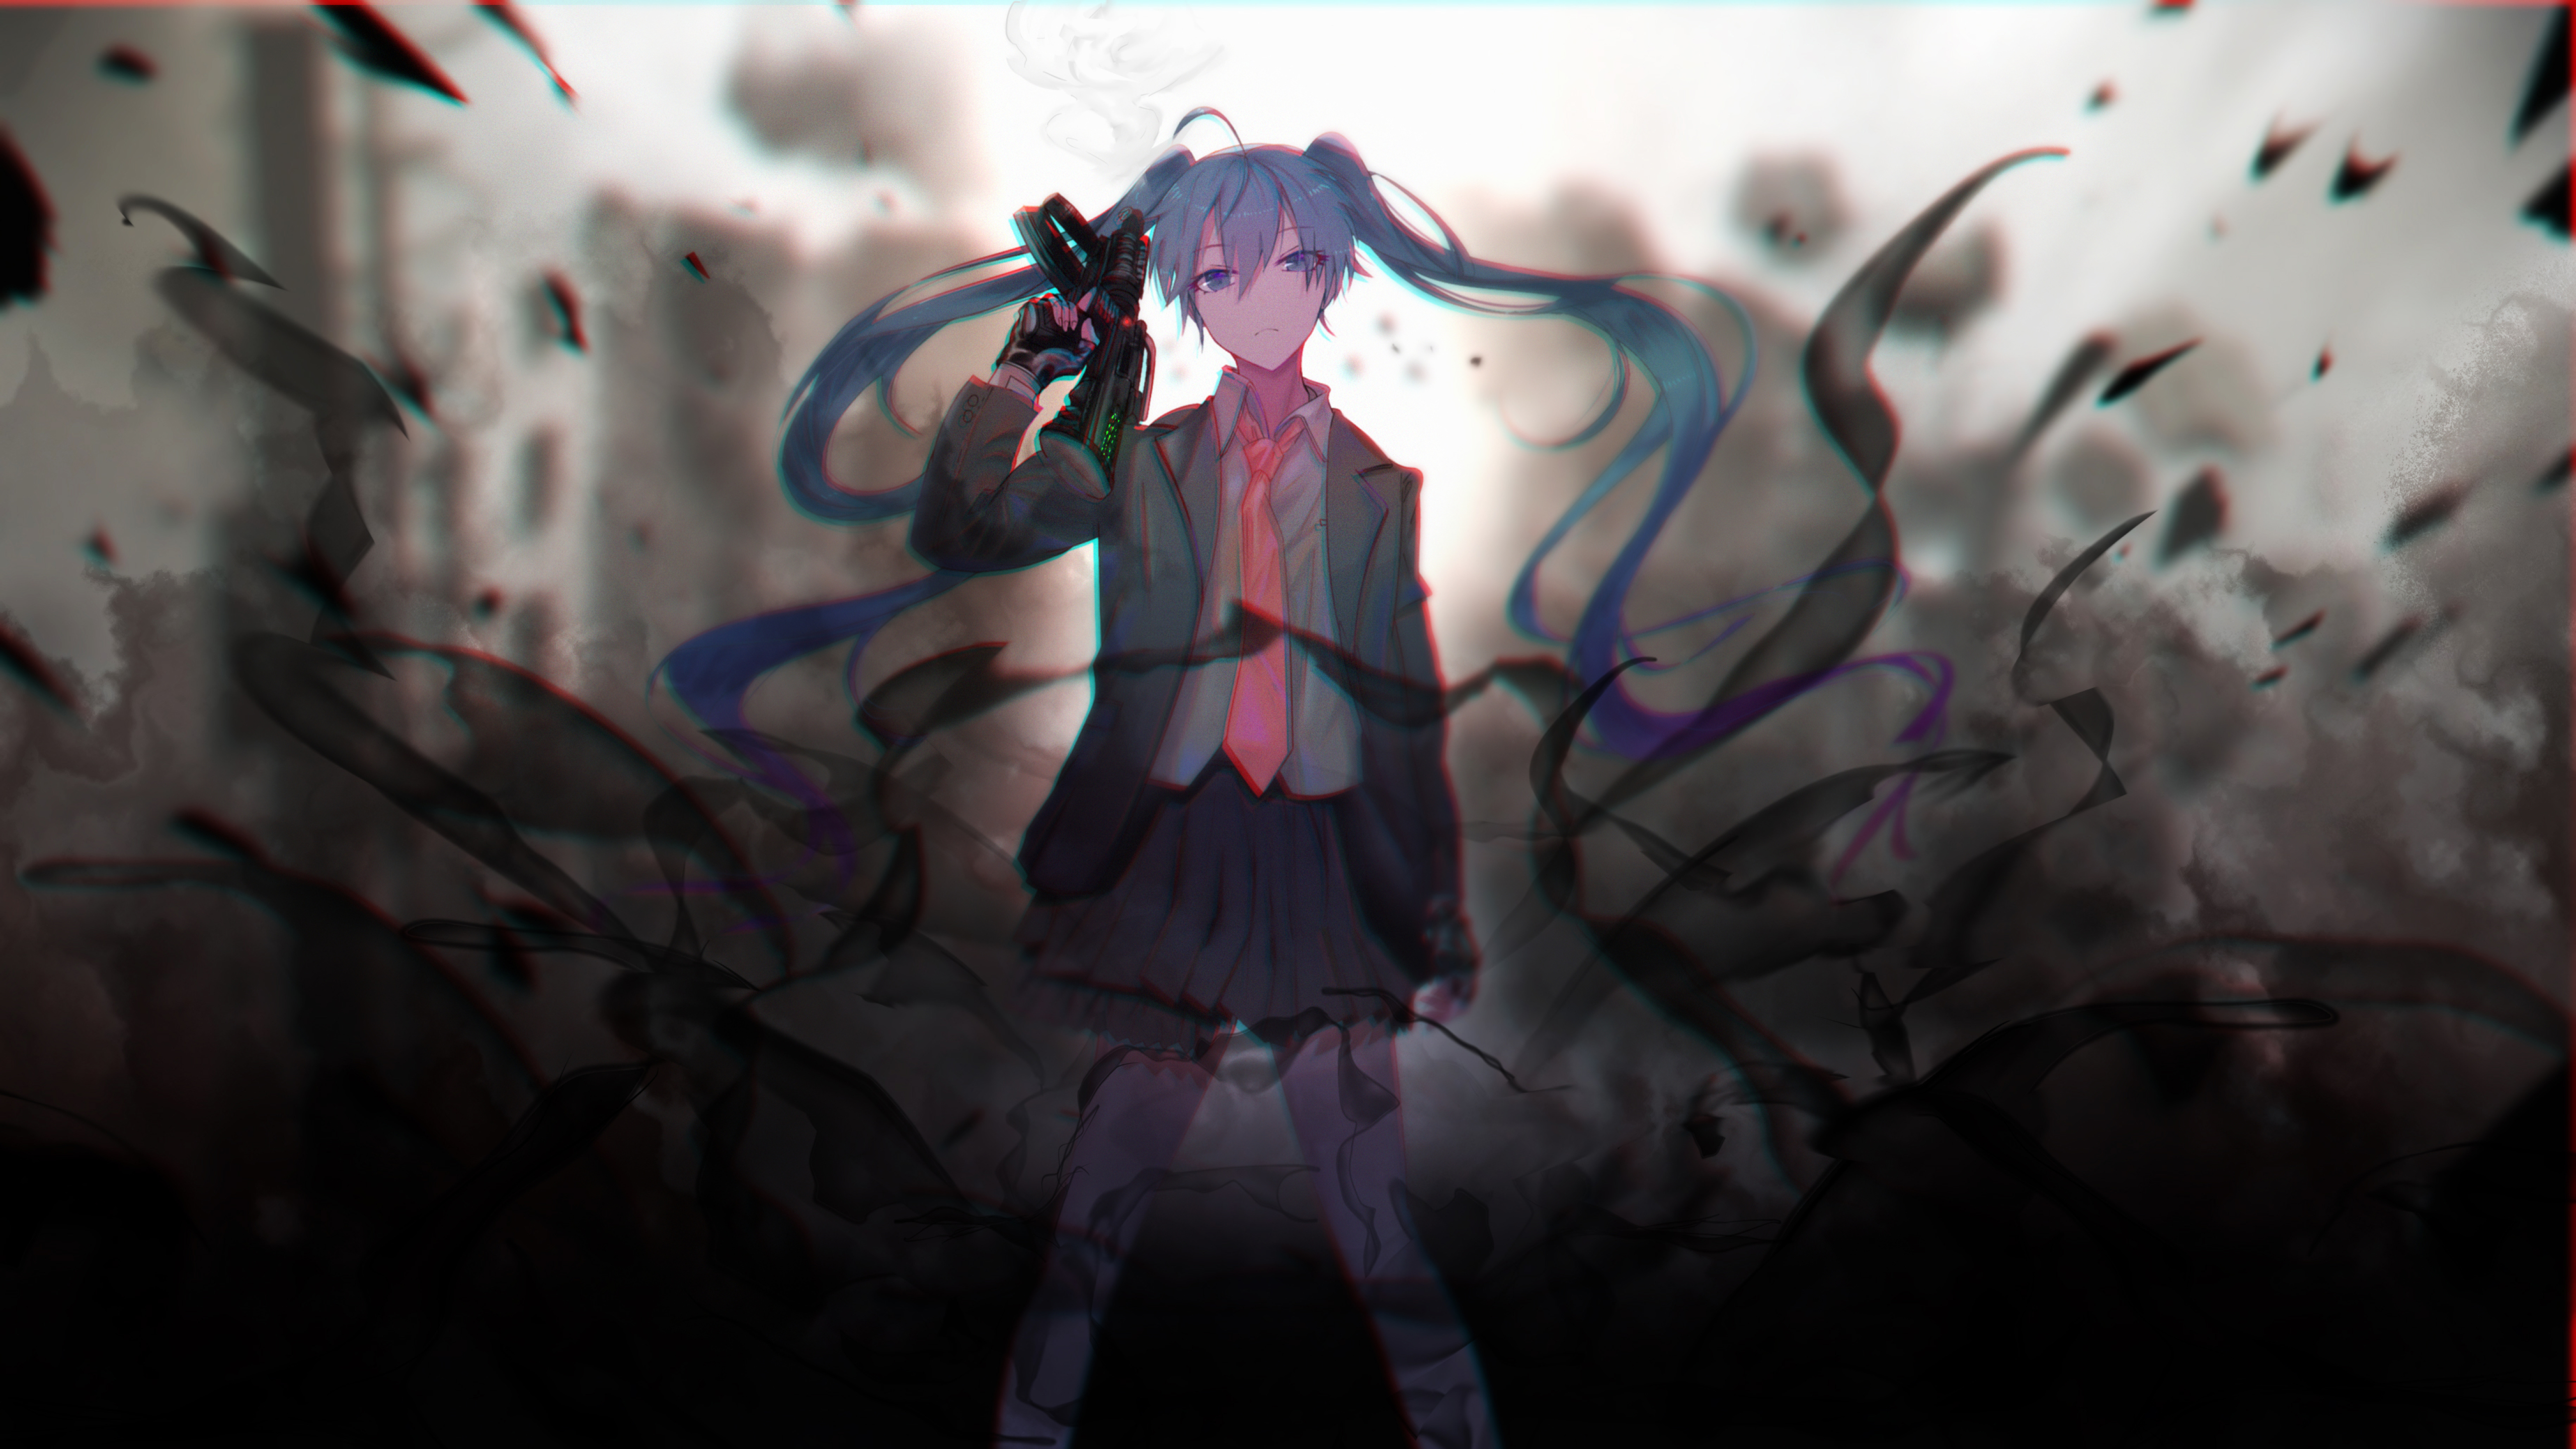 5120x2880 Vocaloid Hatsune Miku 2019 5k Wallpaper Hd Anime 4k Wallpapers Images Photos And Background